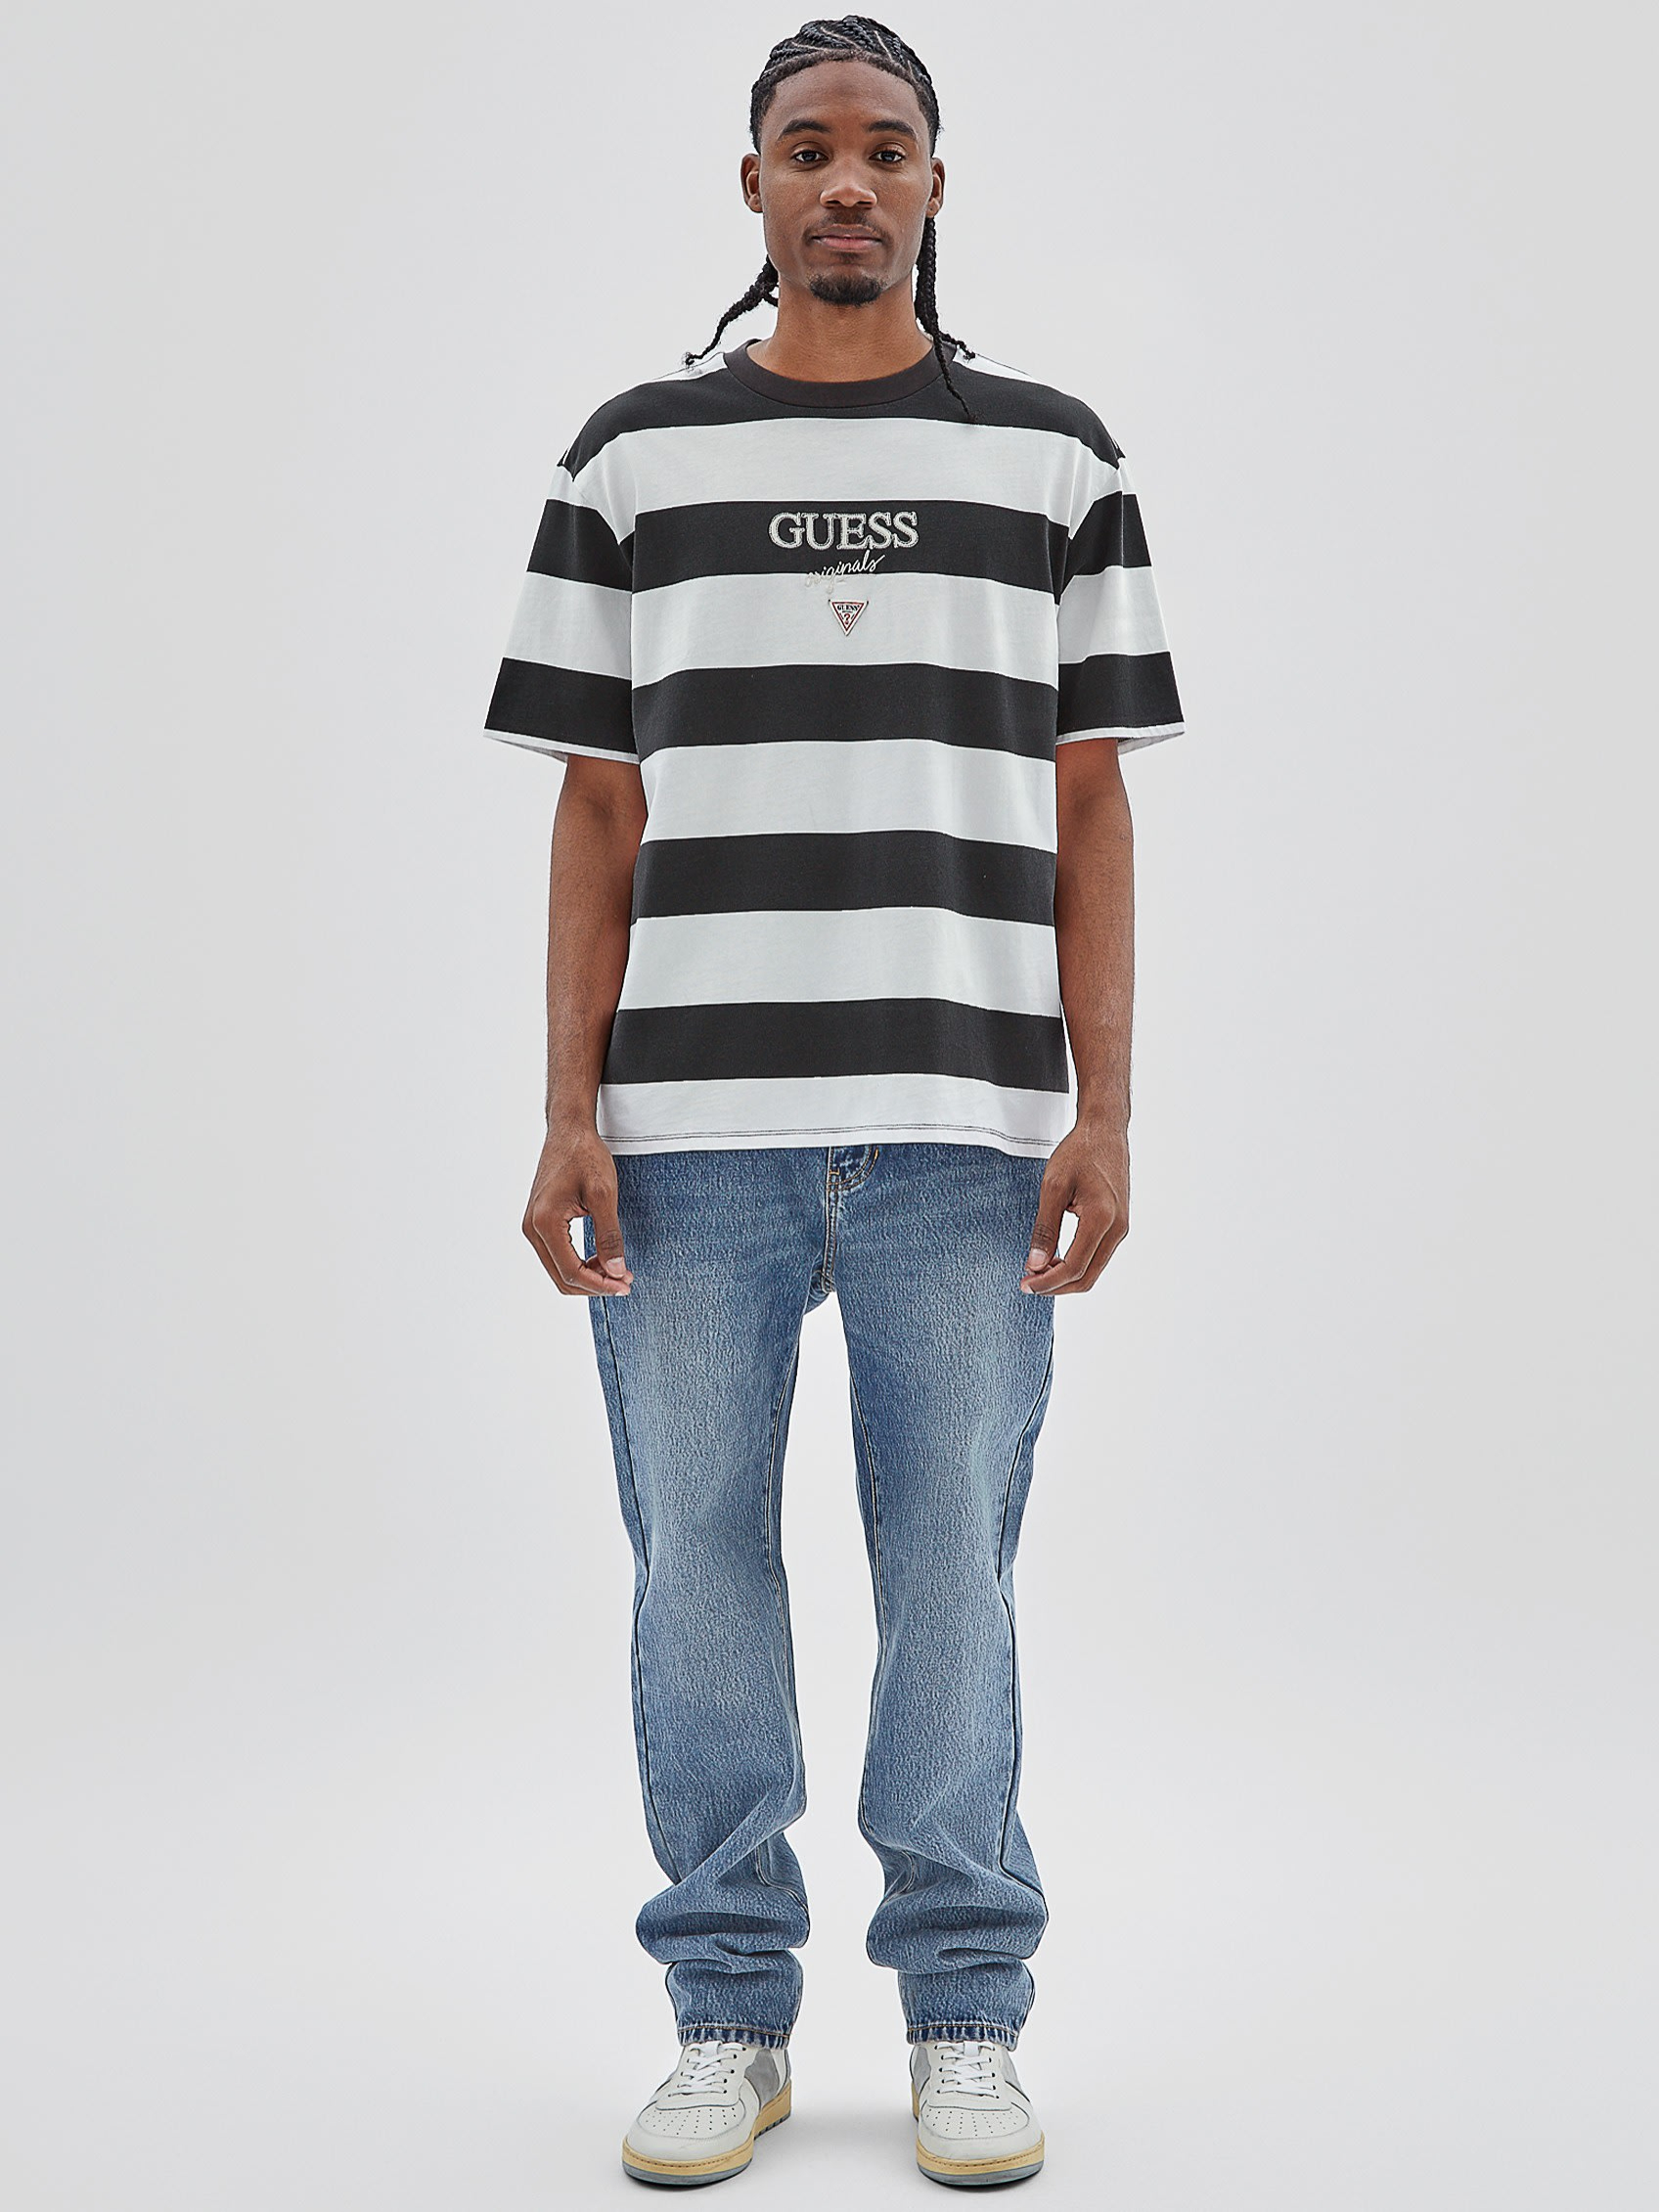 GUESS Originals Rugby Stripe Tee | Guess Philippines